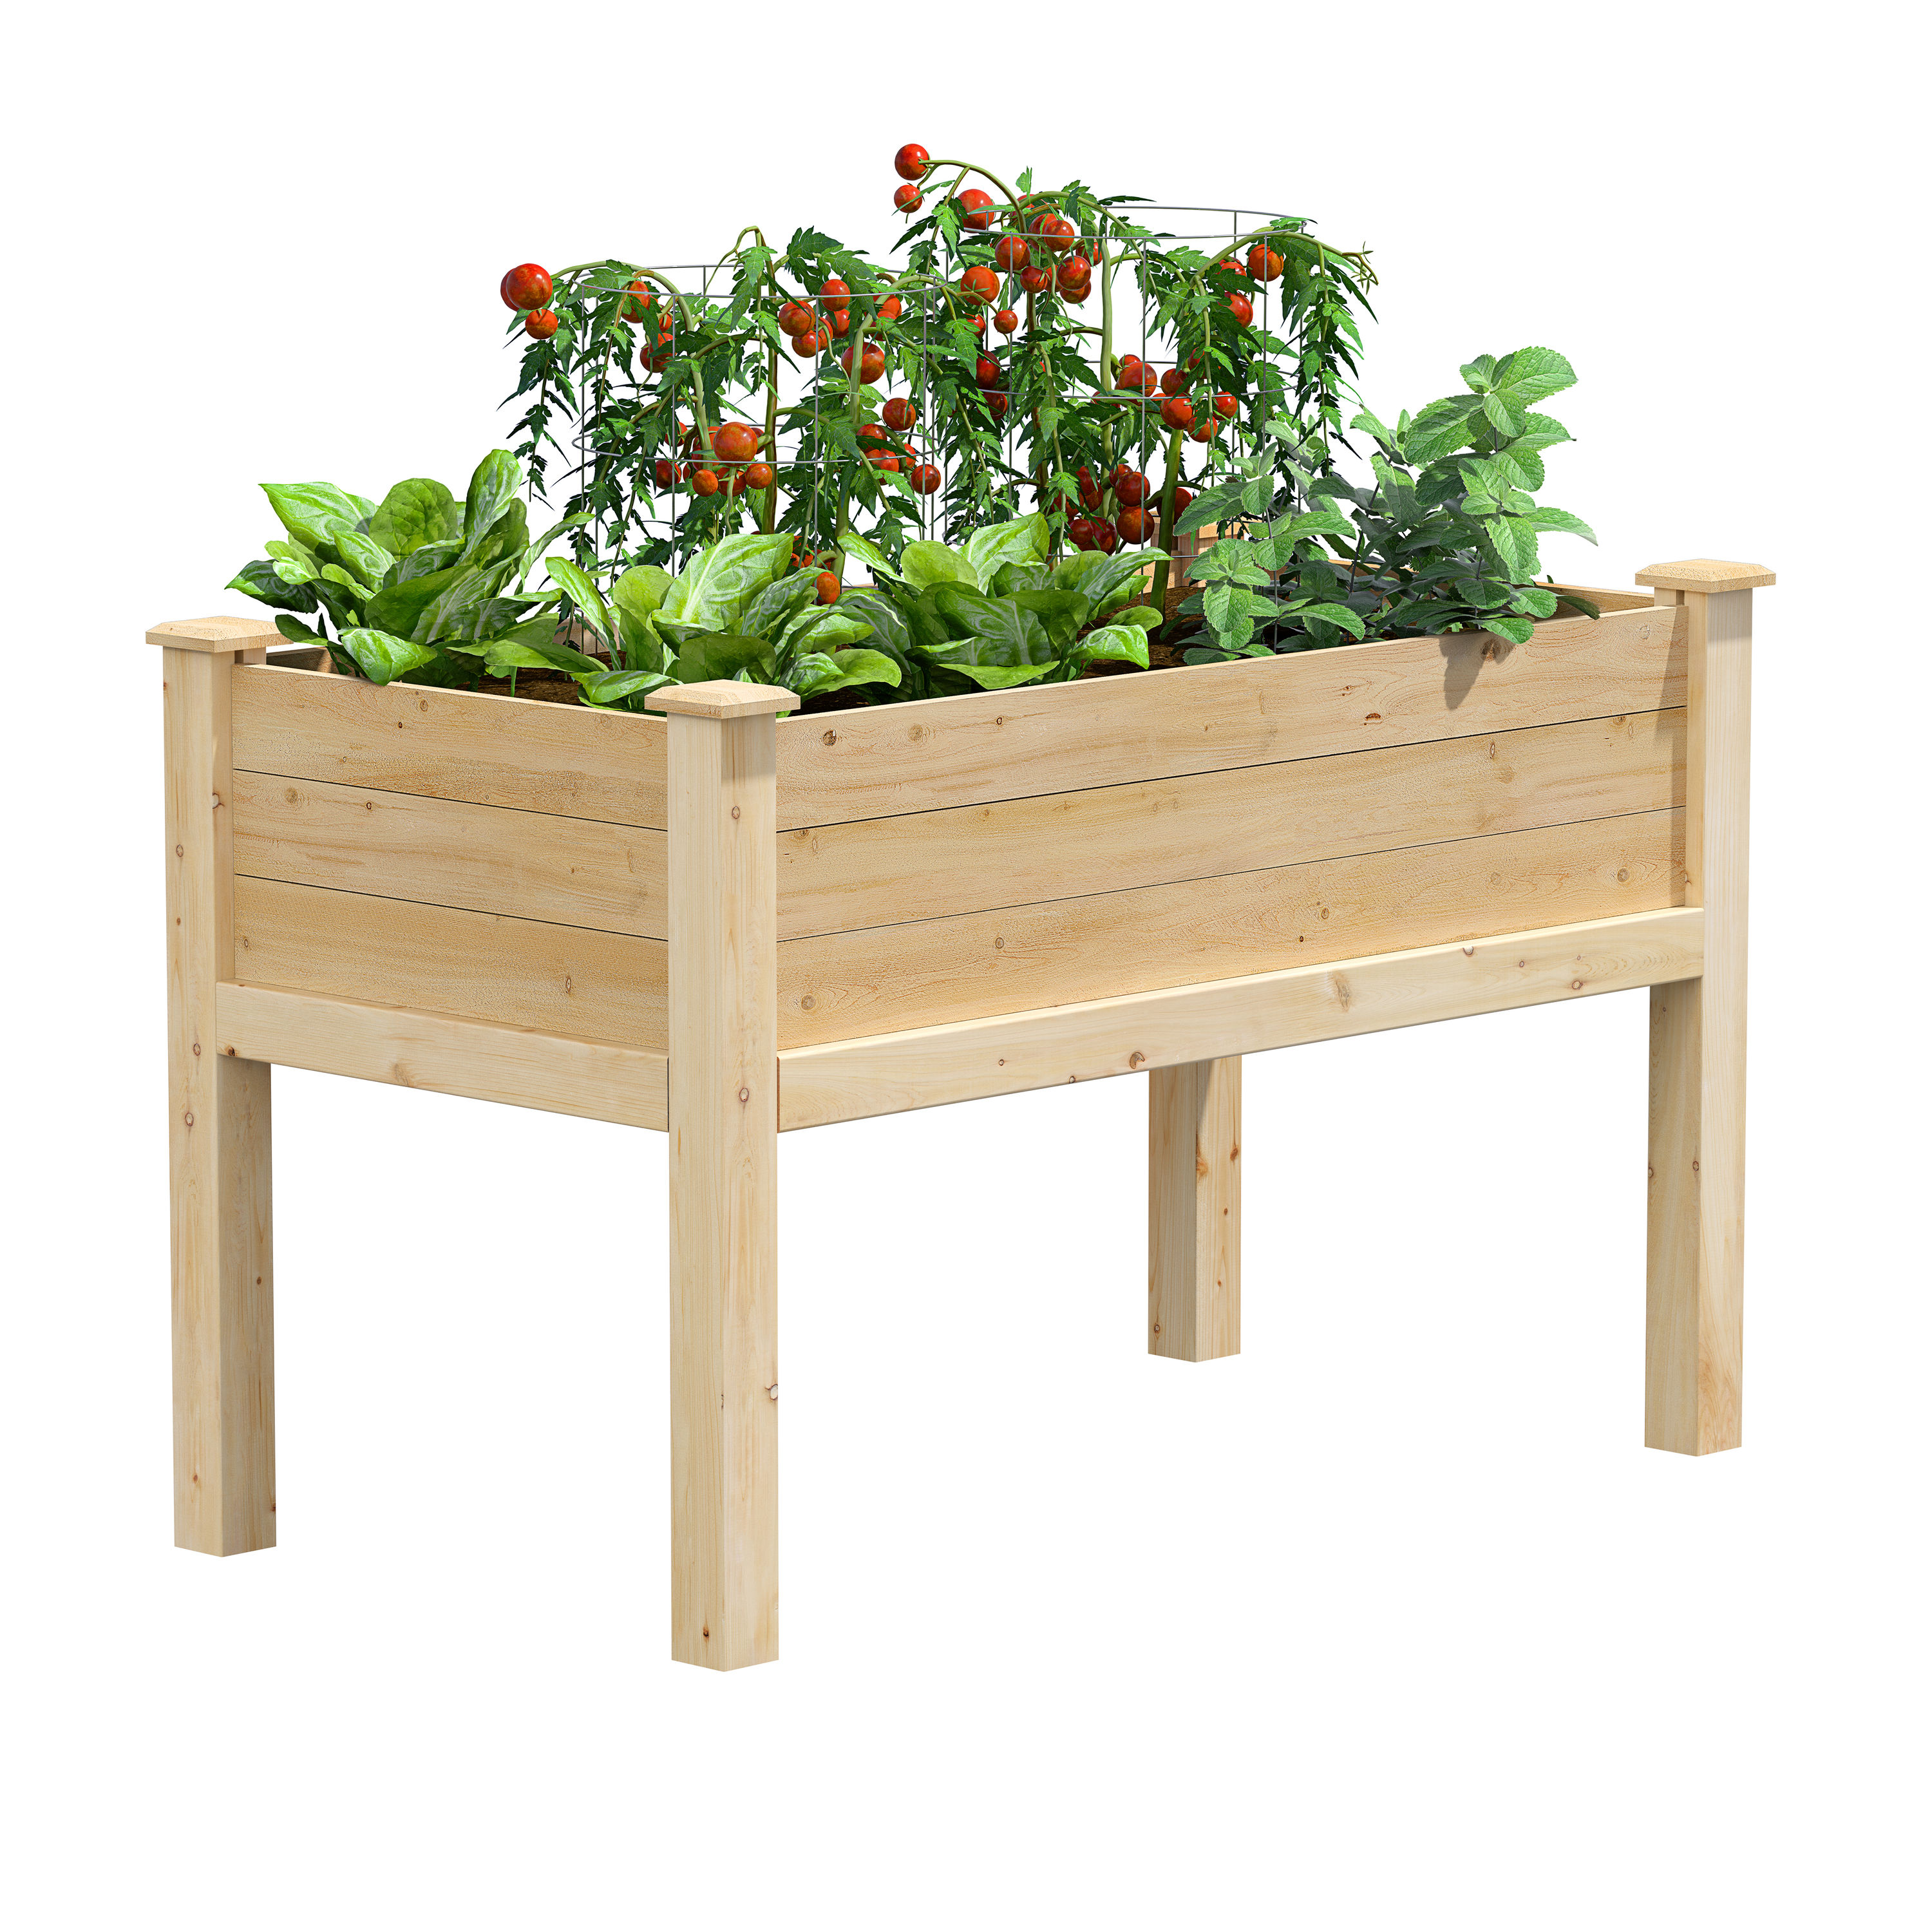 24" Wood Elevated Square Raised Garden Bed Flower Pot Vegetable Seed Planter Box 